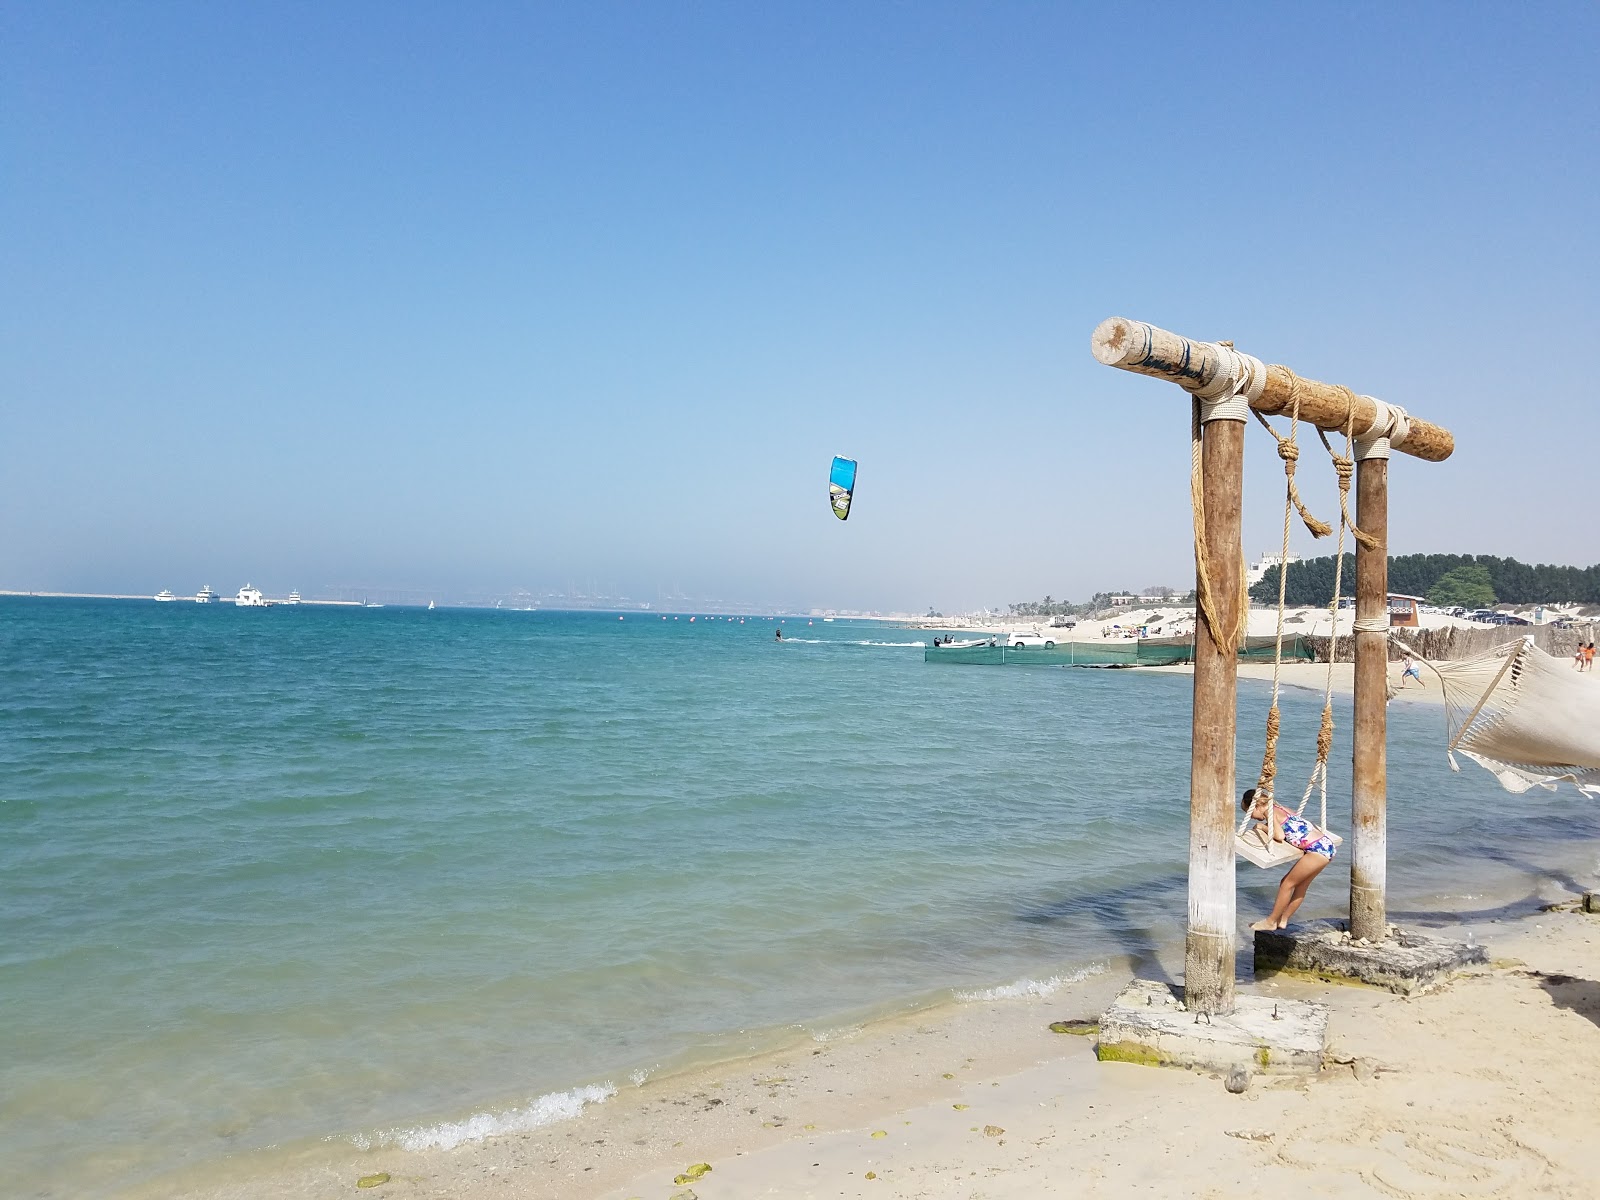 Photo of Jebel Ali Beach and the settlement